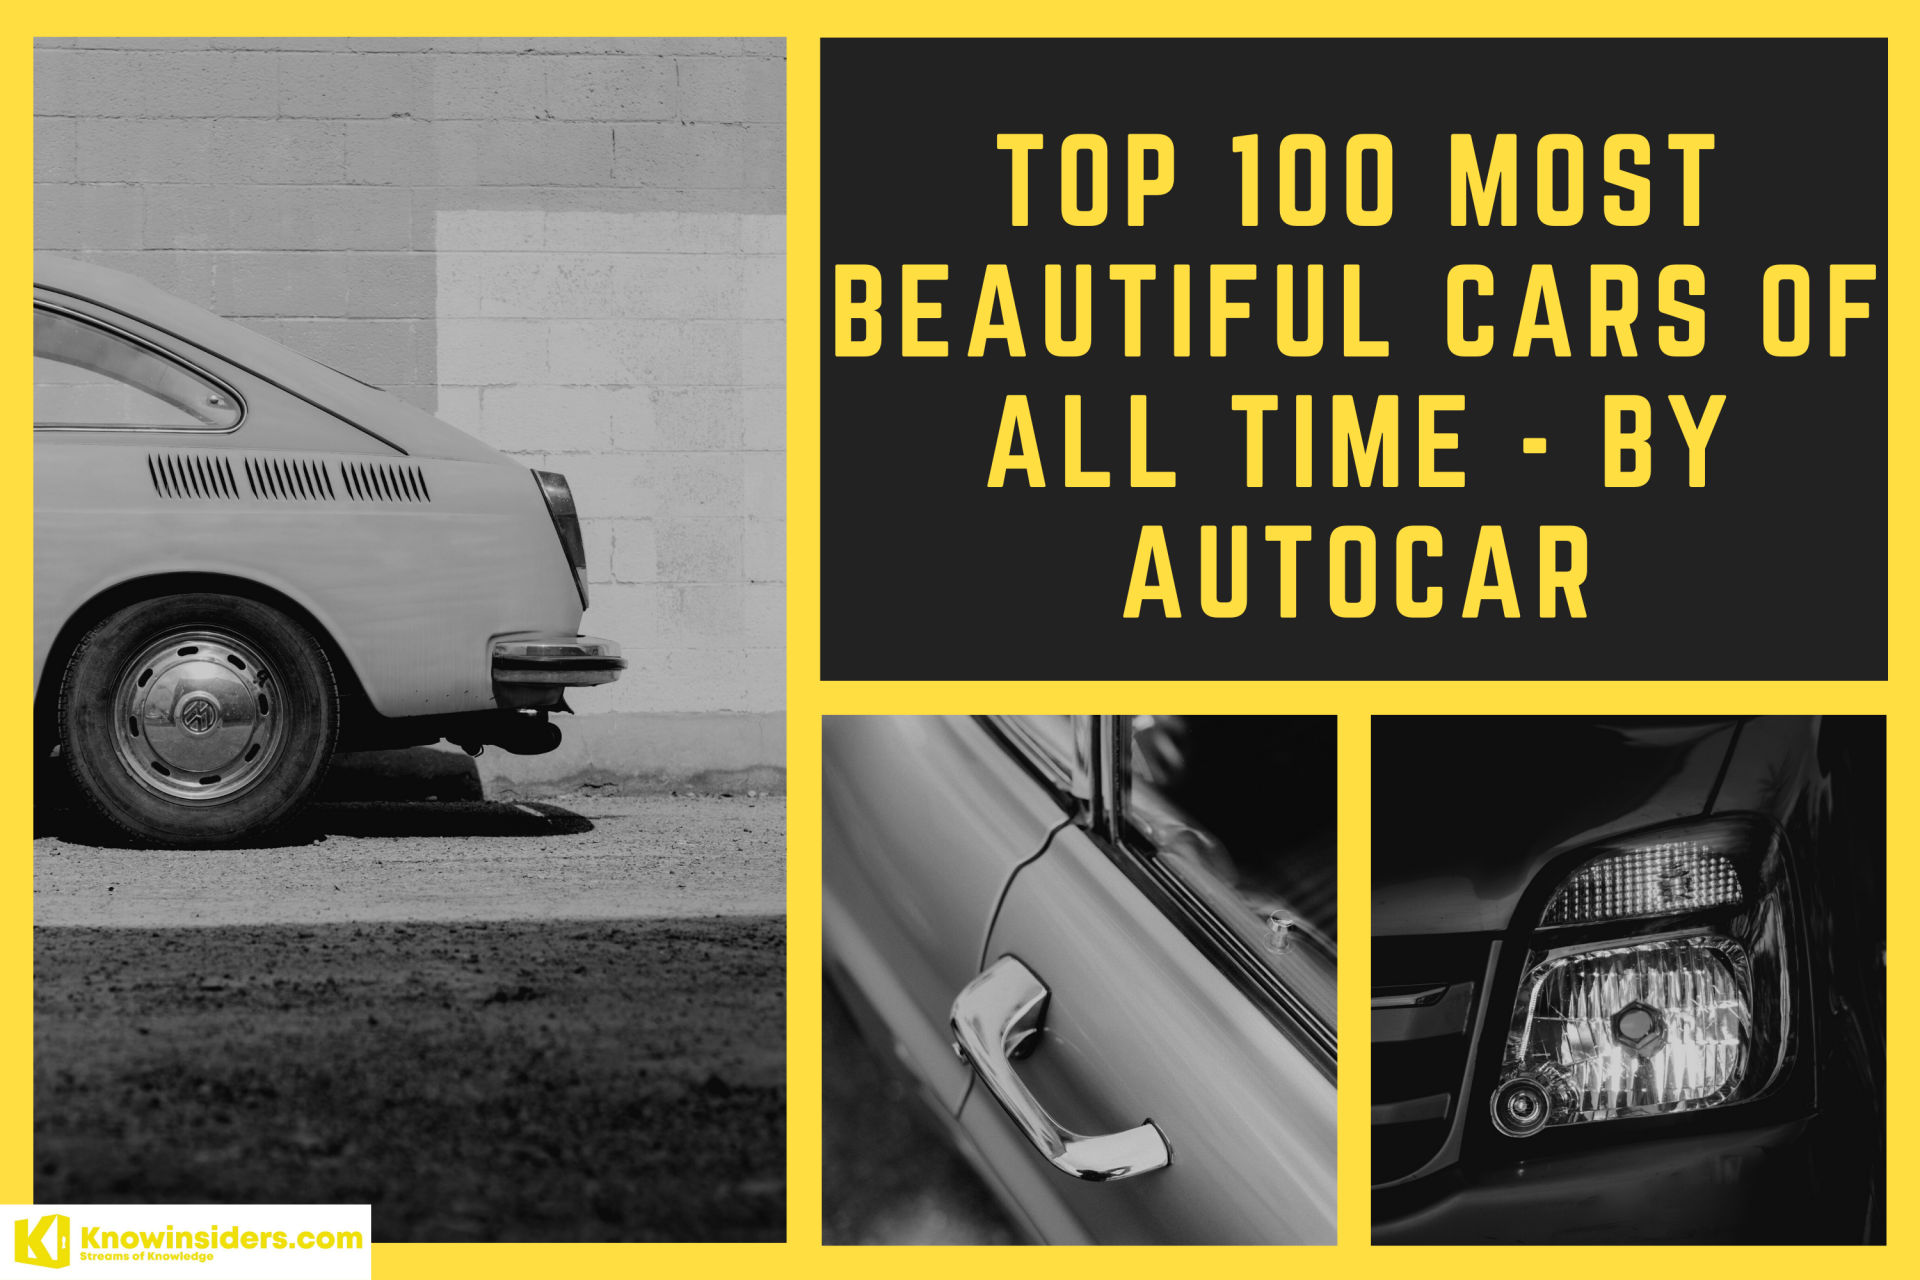 Top 100 Most Beautiful Cars of All Time - by Autocar